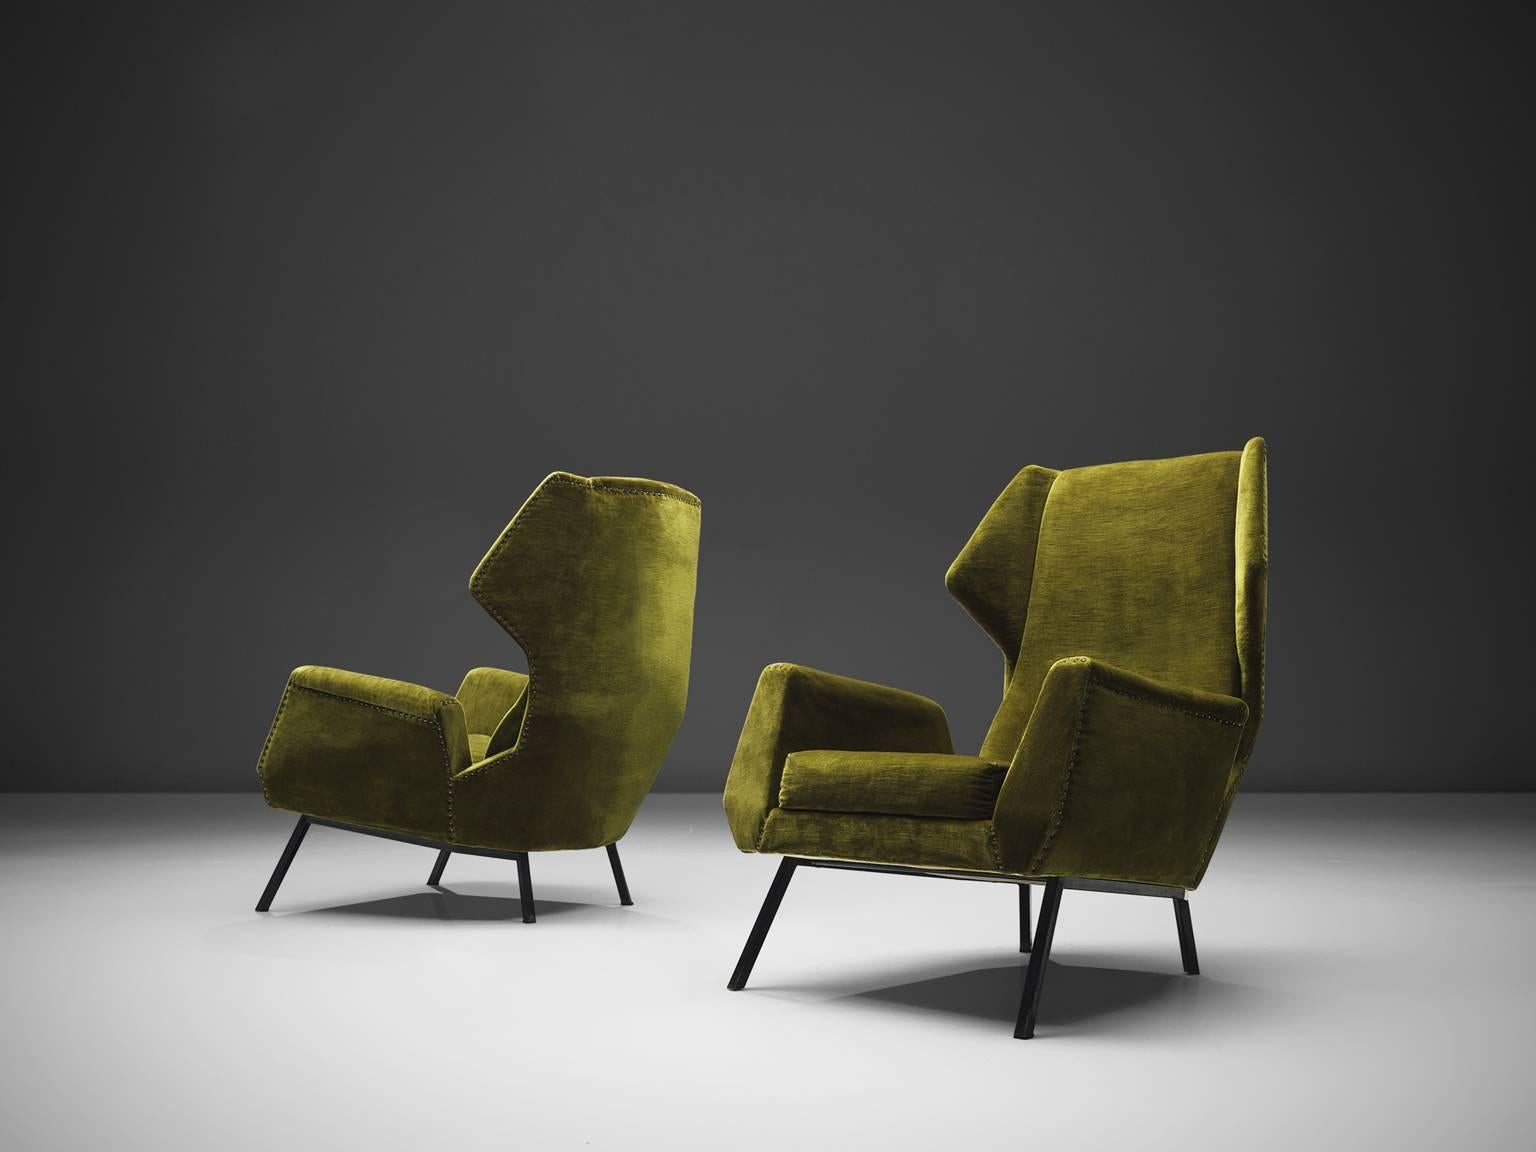 Pair of easy wingback chairs, green velvet and steel, Italy, 1960s

These robust and sculptural chairs feature a velvet top with ears at the top of the design with a straight back. The armrests face each other, and are attached to the back of the